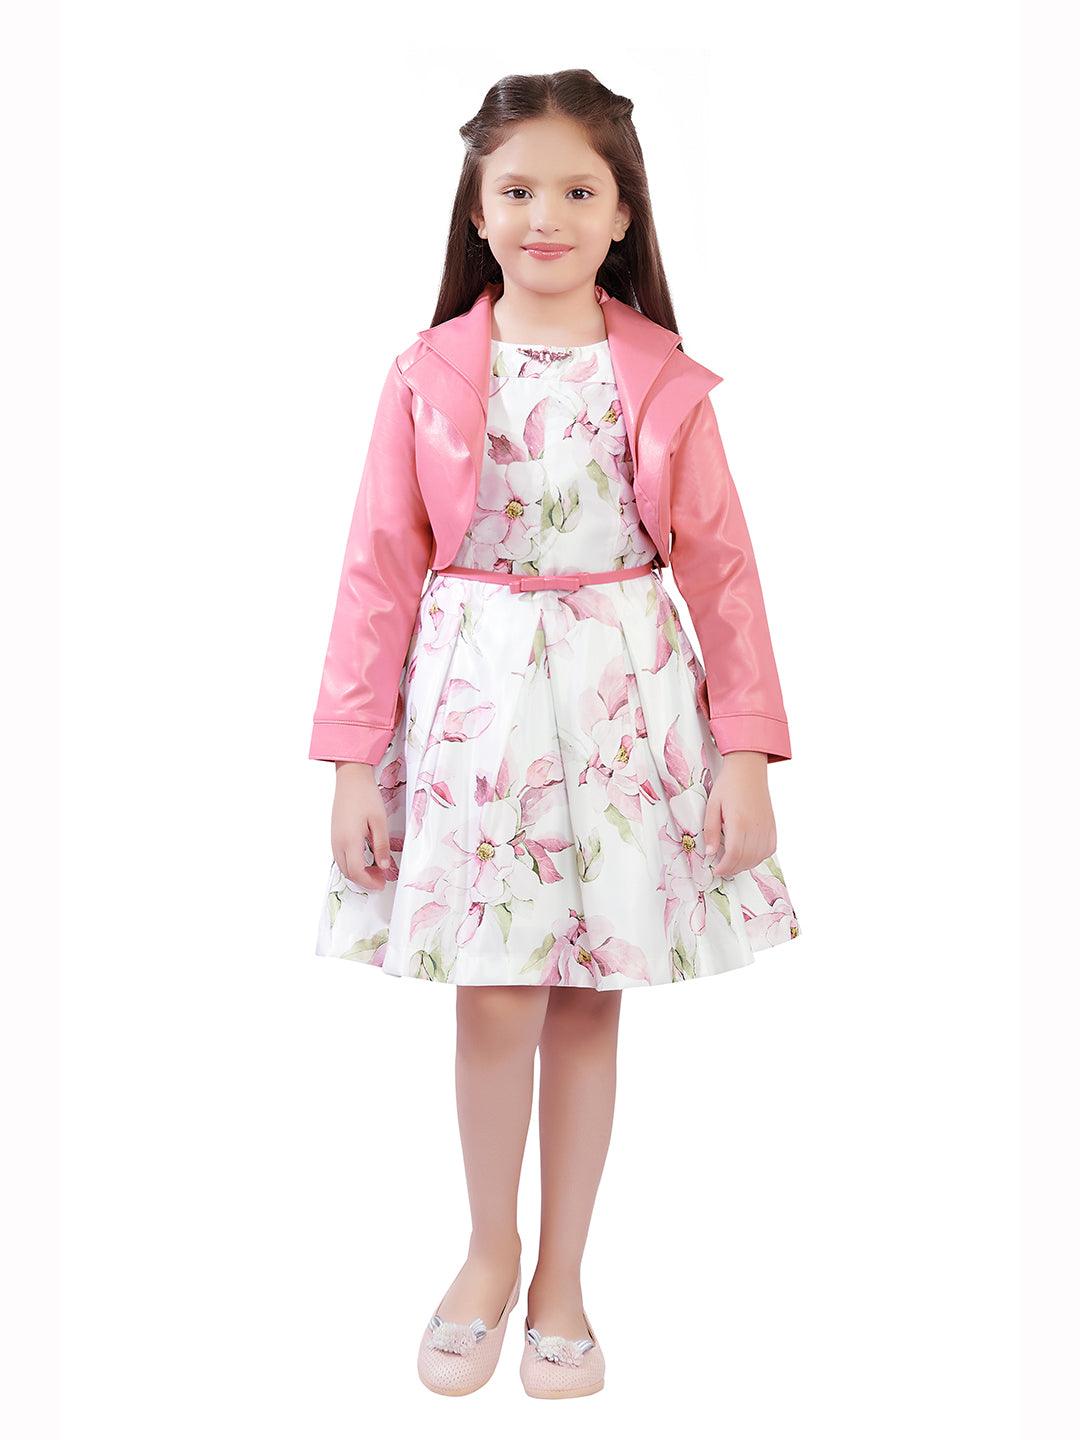 Tiny Baby Pink Colored Dress - 2116 Pink - TINY BABY INDIA shop.tinybaby.in